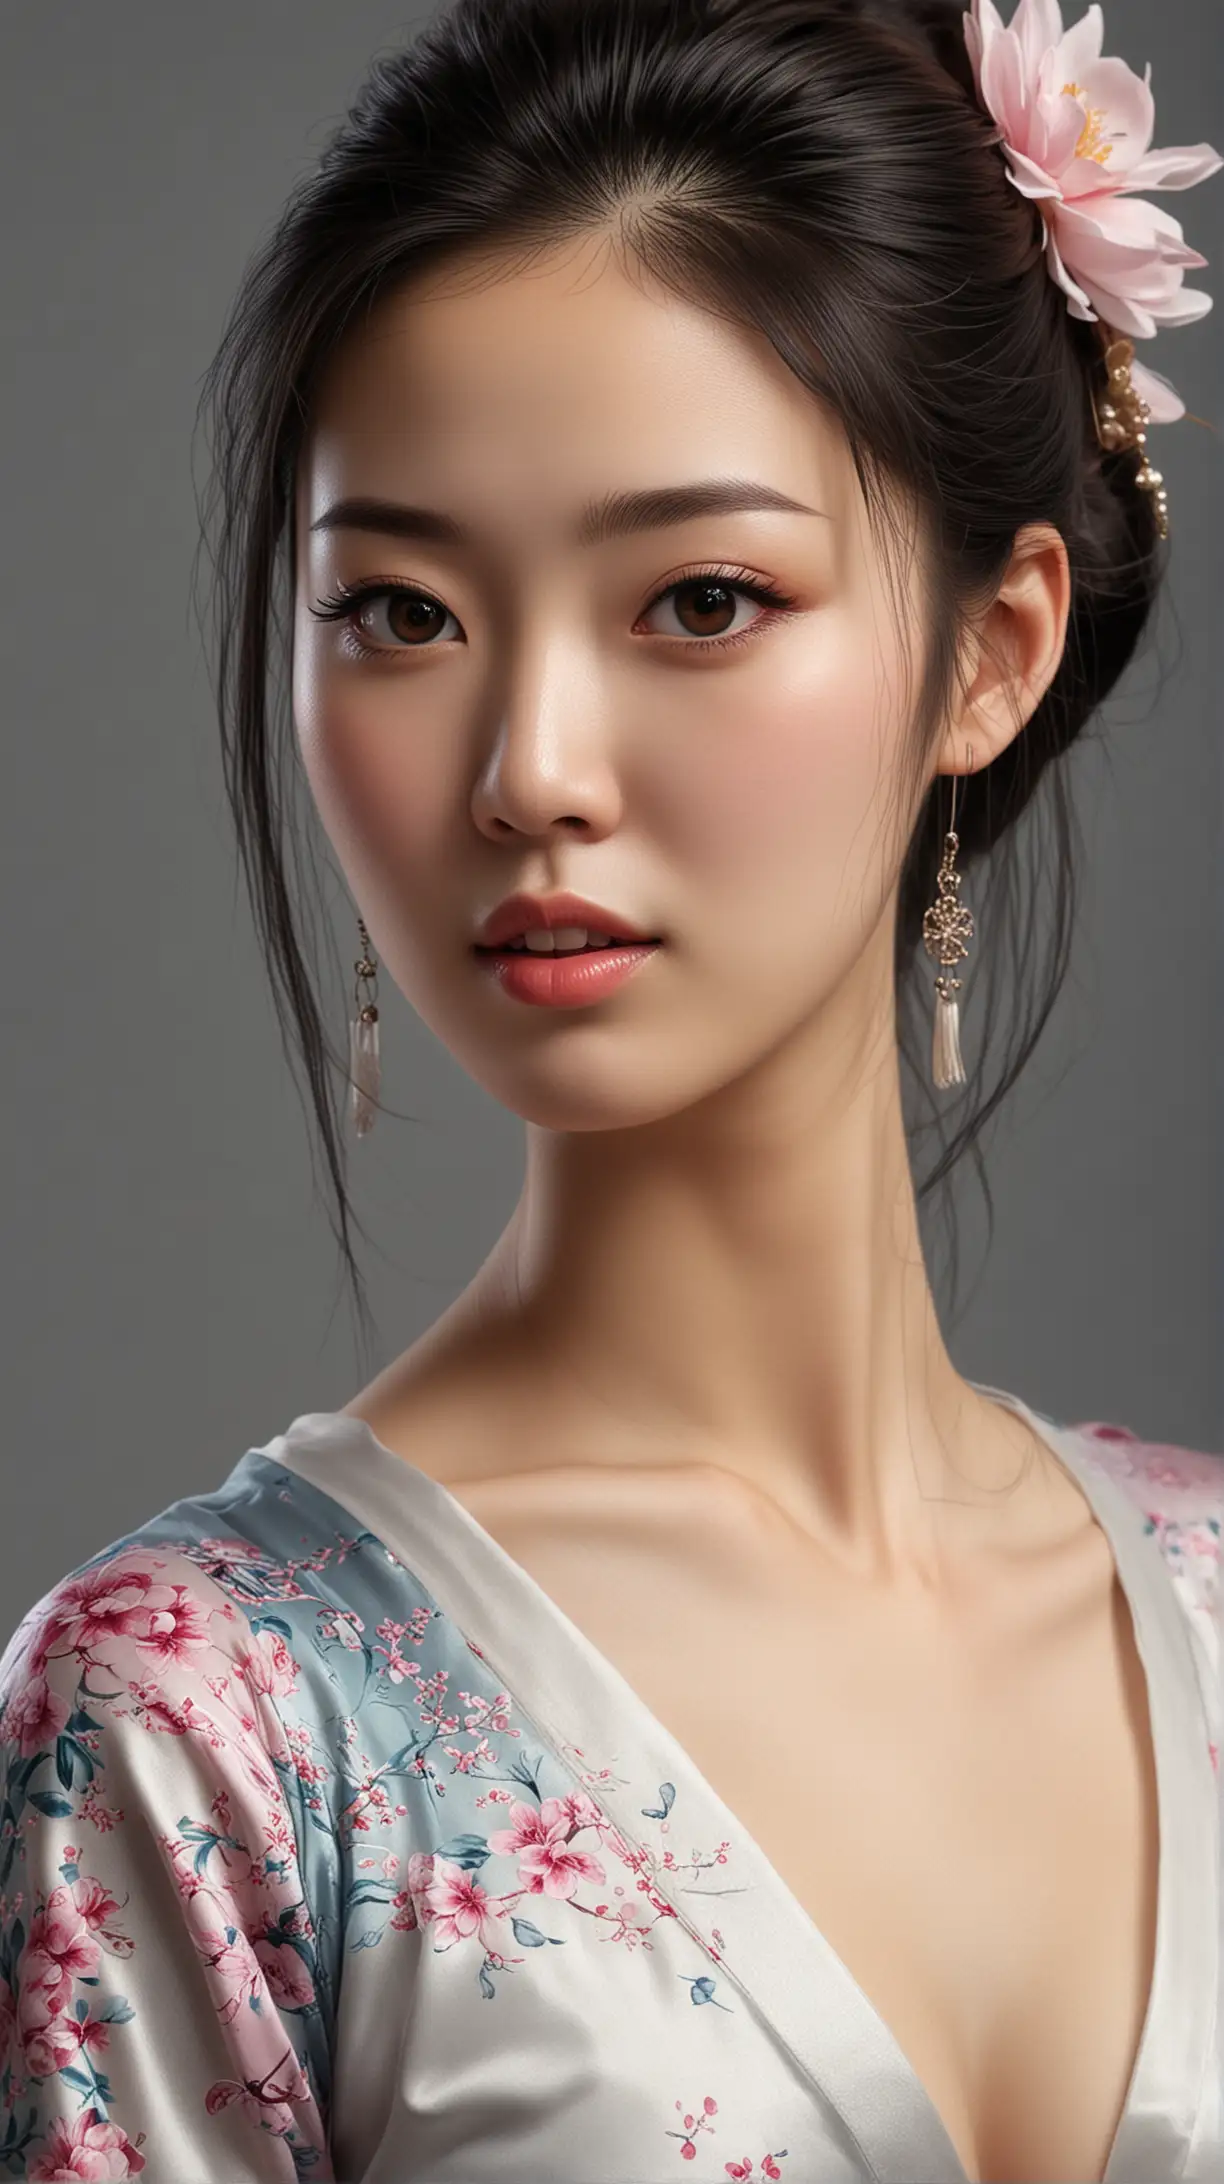 Hyper Realistic Portrait of a Beautiful Chinese Girl